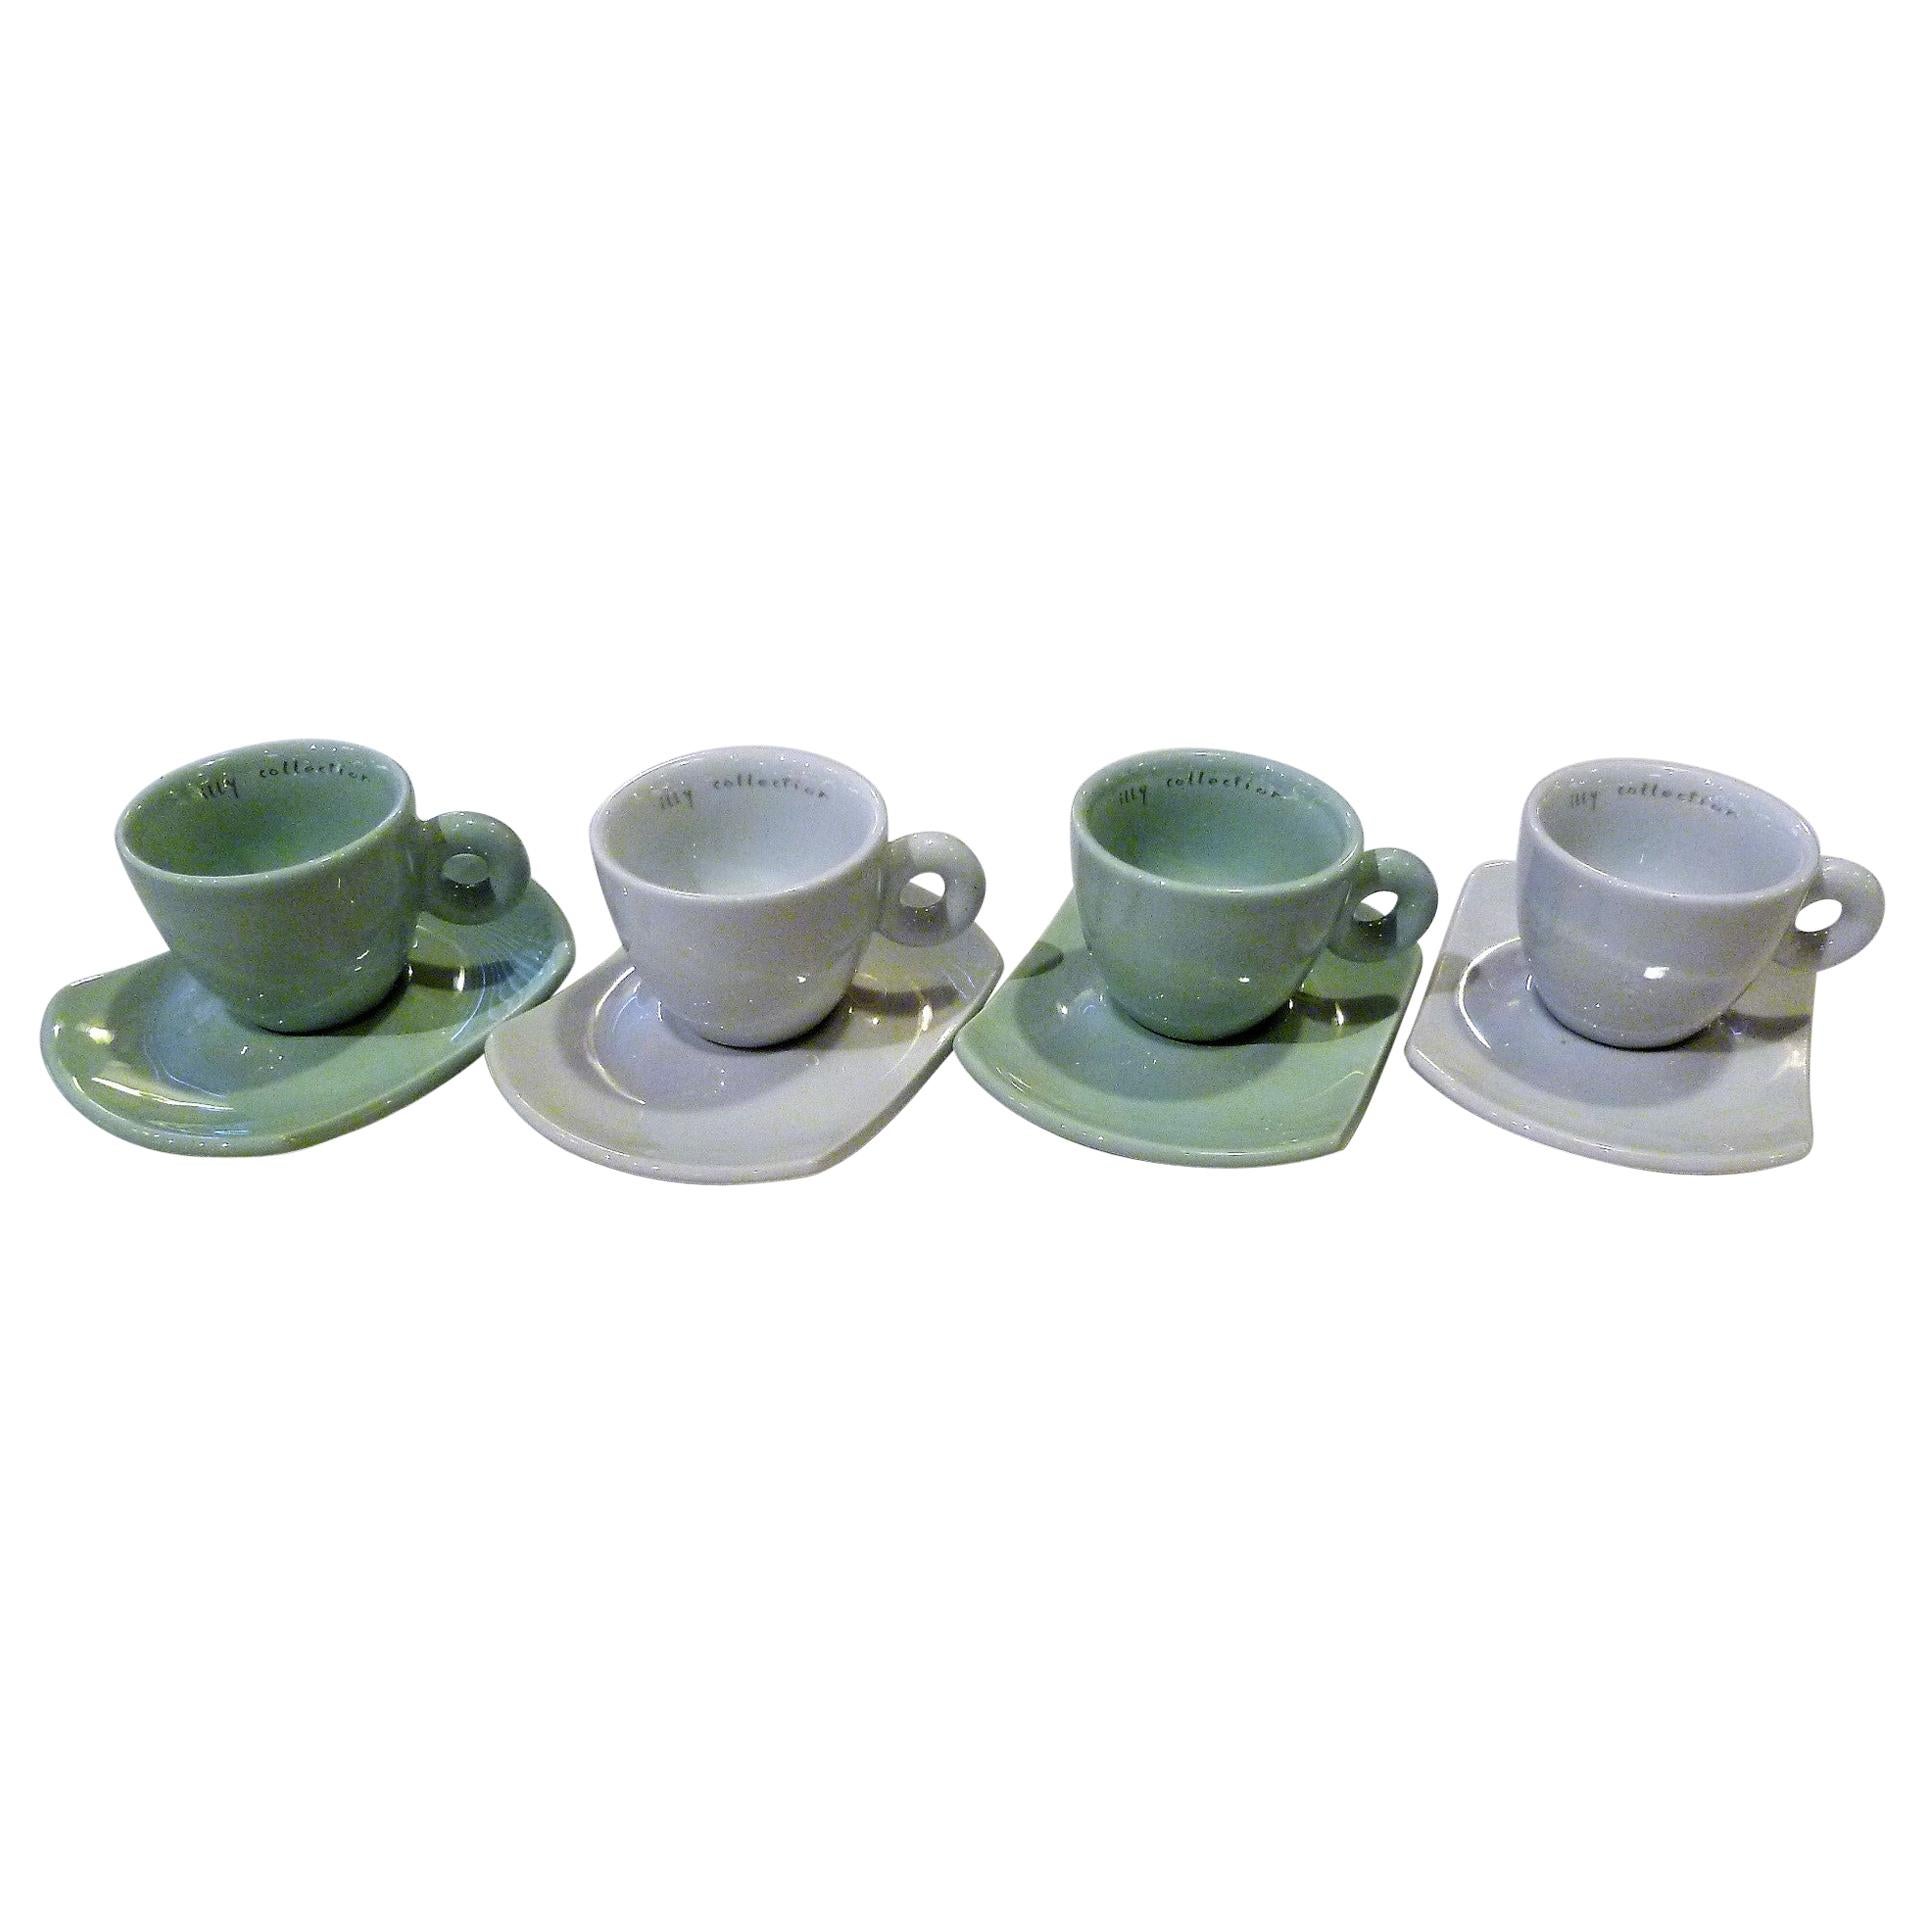 Daniel Buren Illy Collection 2004 Bianco Verde Expresso Cups and Saucers